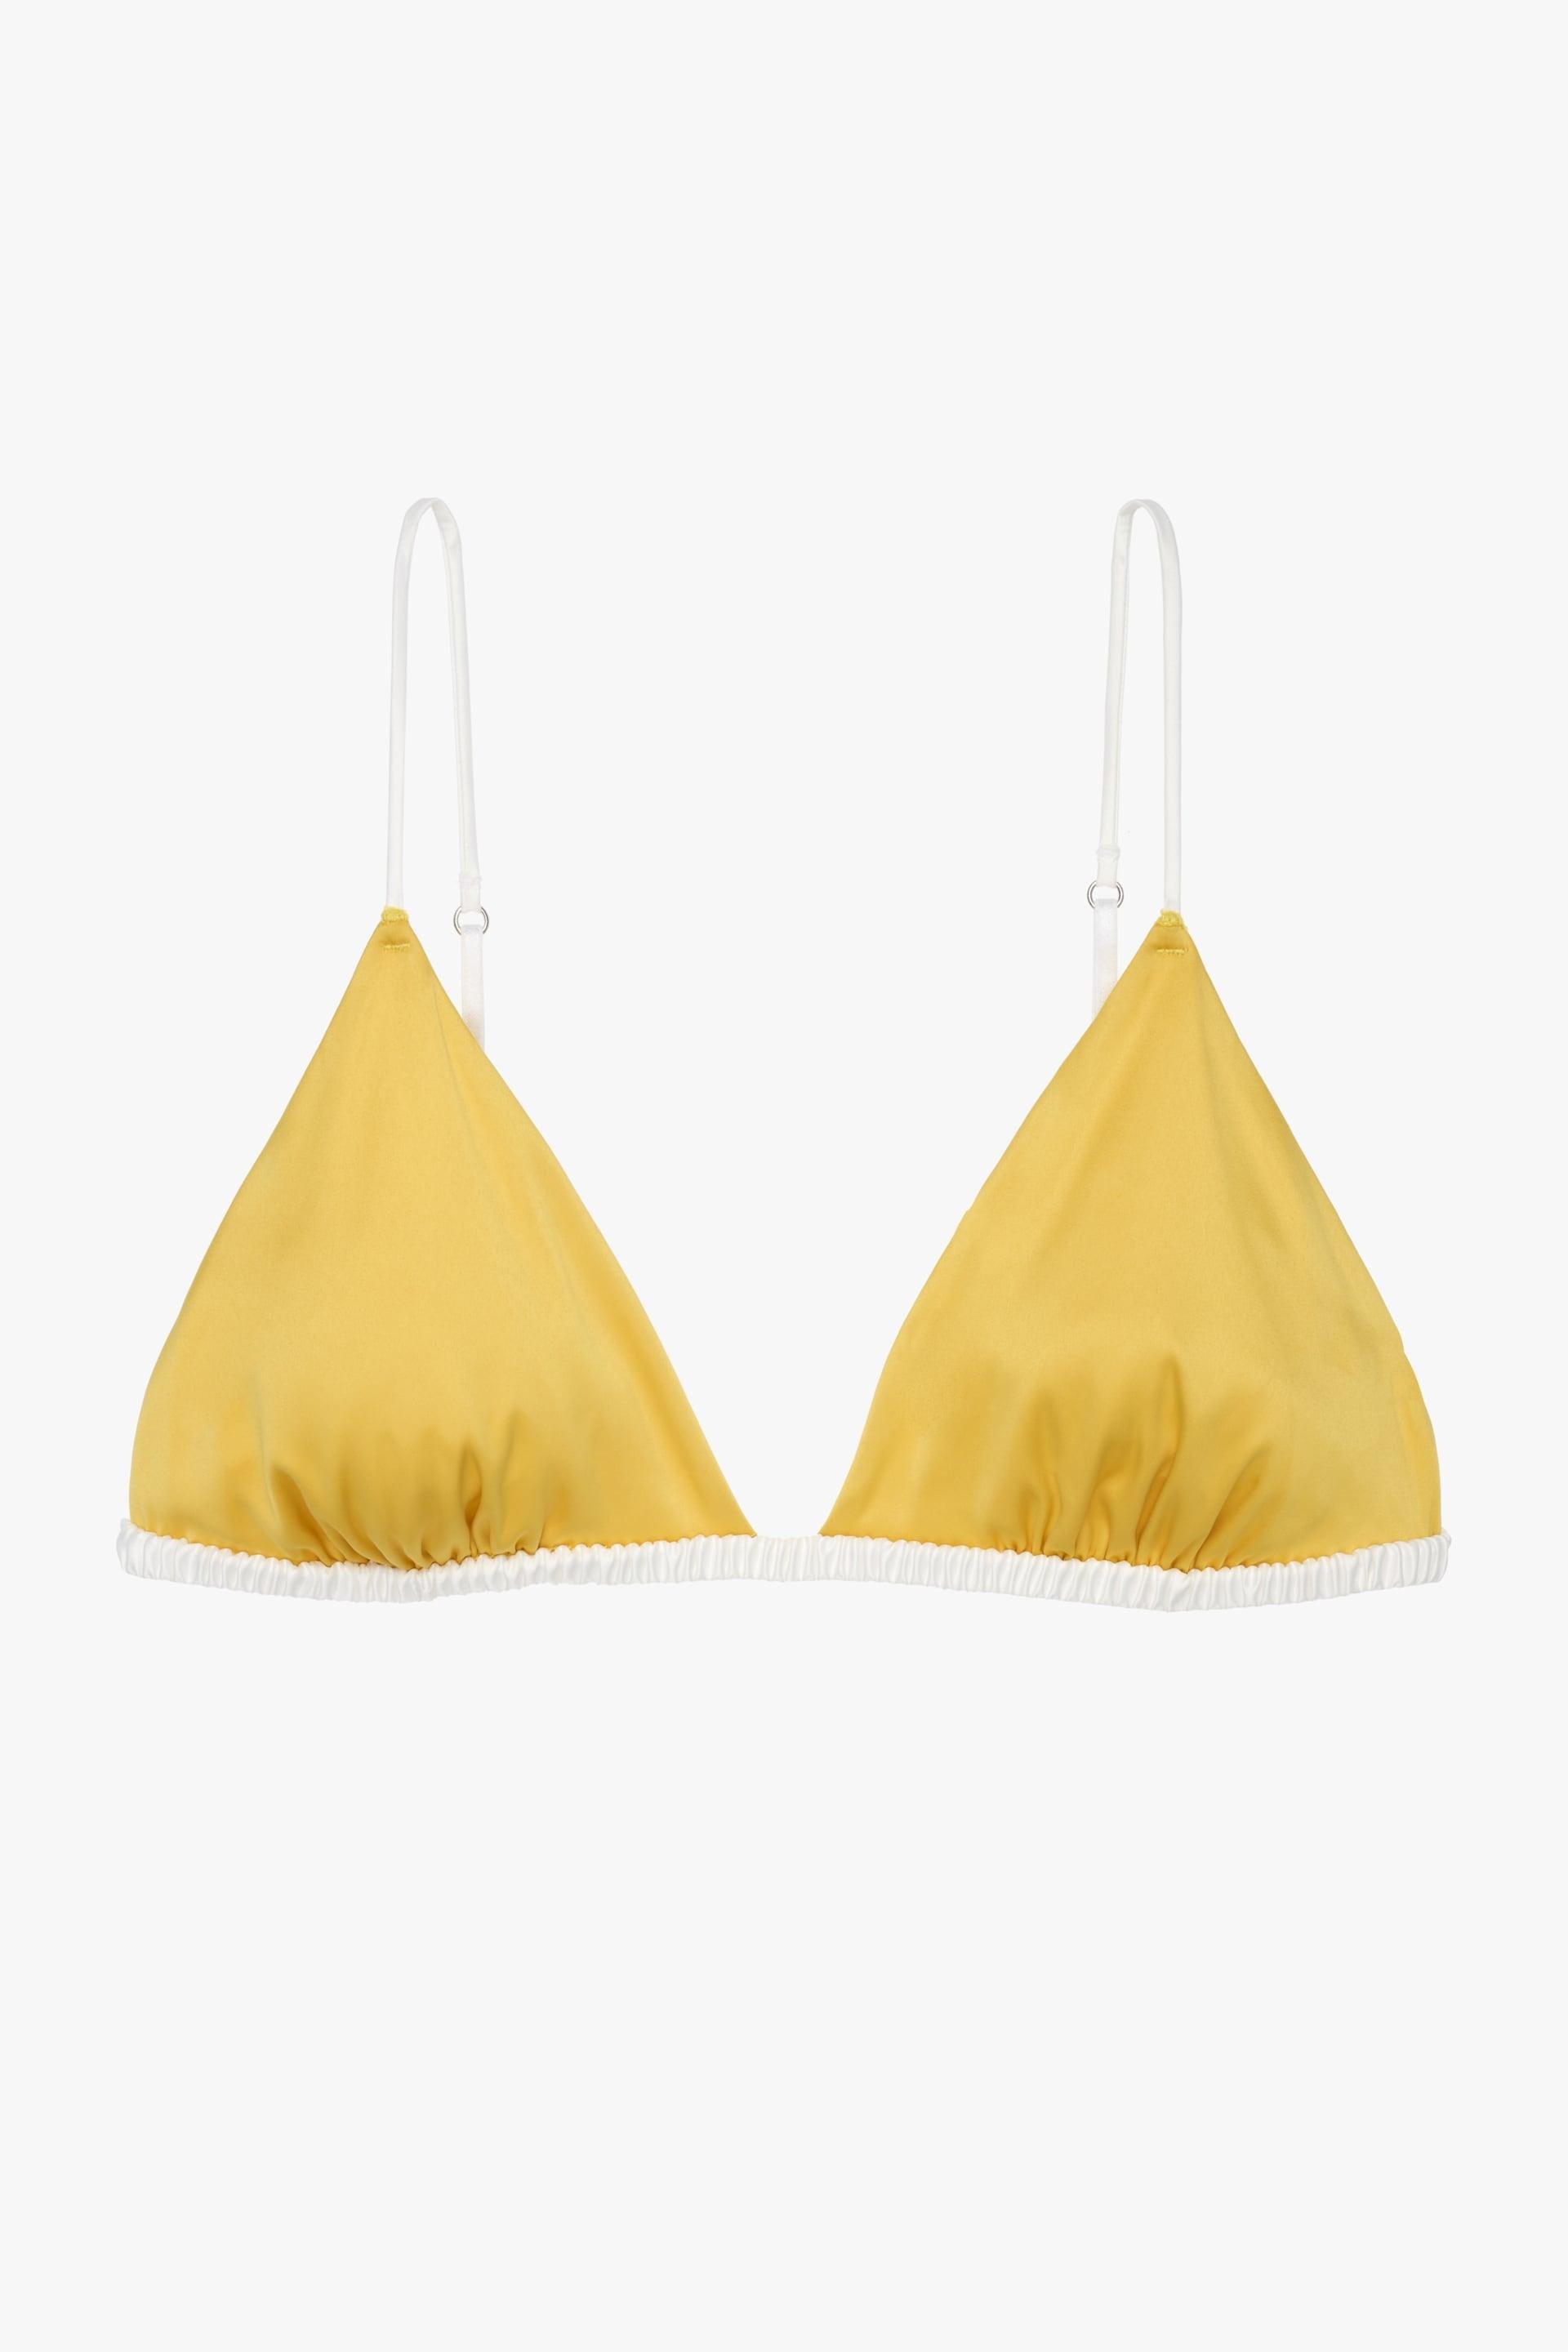 SATIN EFFECT TRIANGLE BRALETTE LIMITED EDITION by ZARA